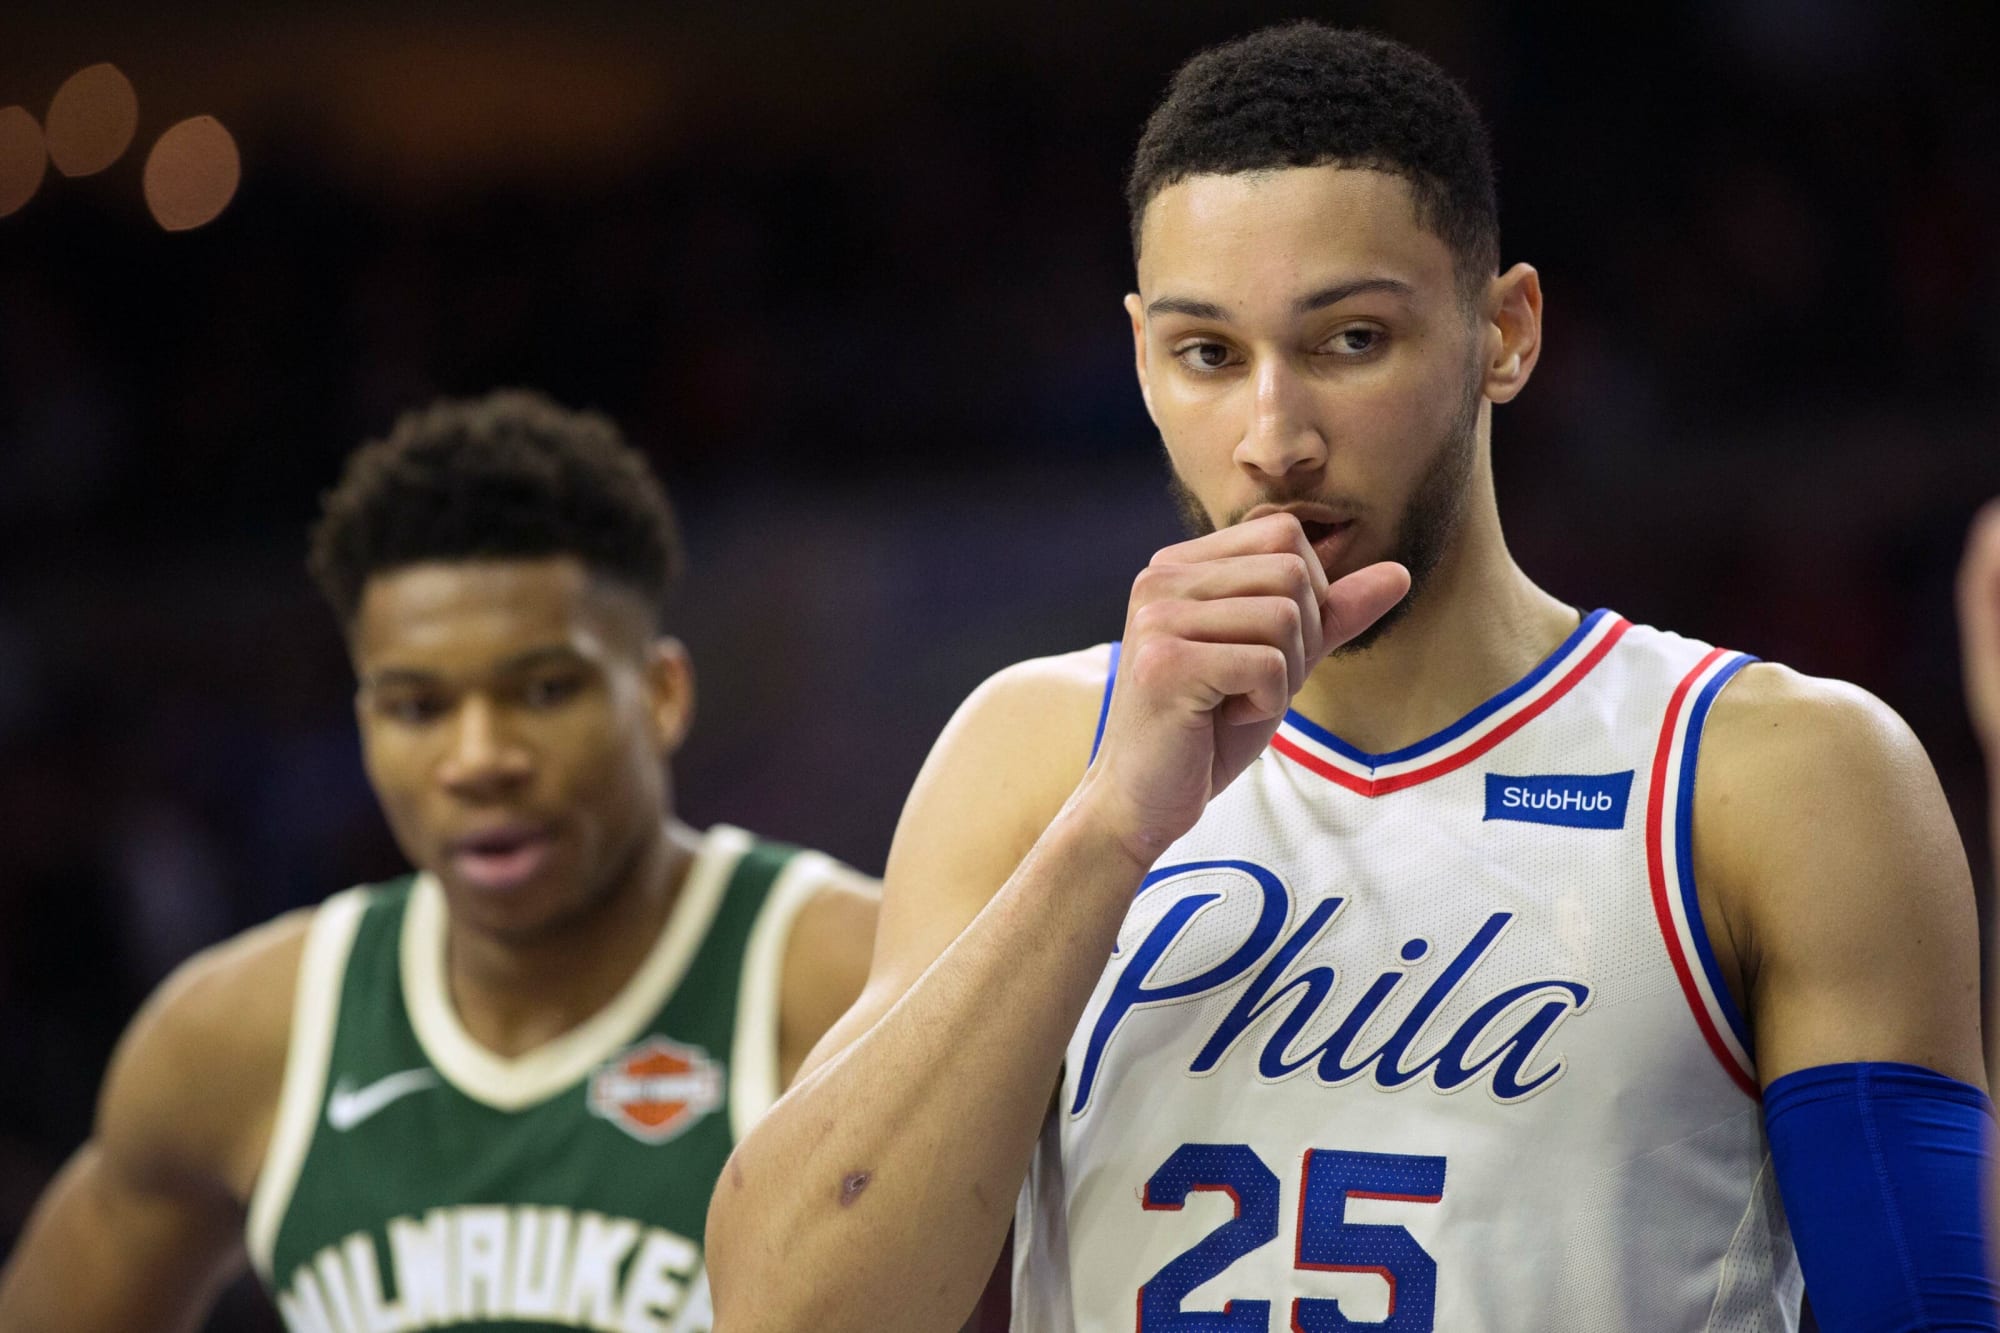 Sixers-Bucks observations, best and worst awards: Giannis Antetokounmpo, Ben  Simmons, woeful team display